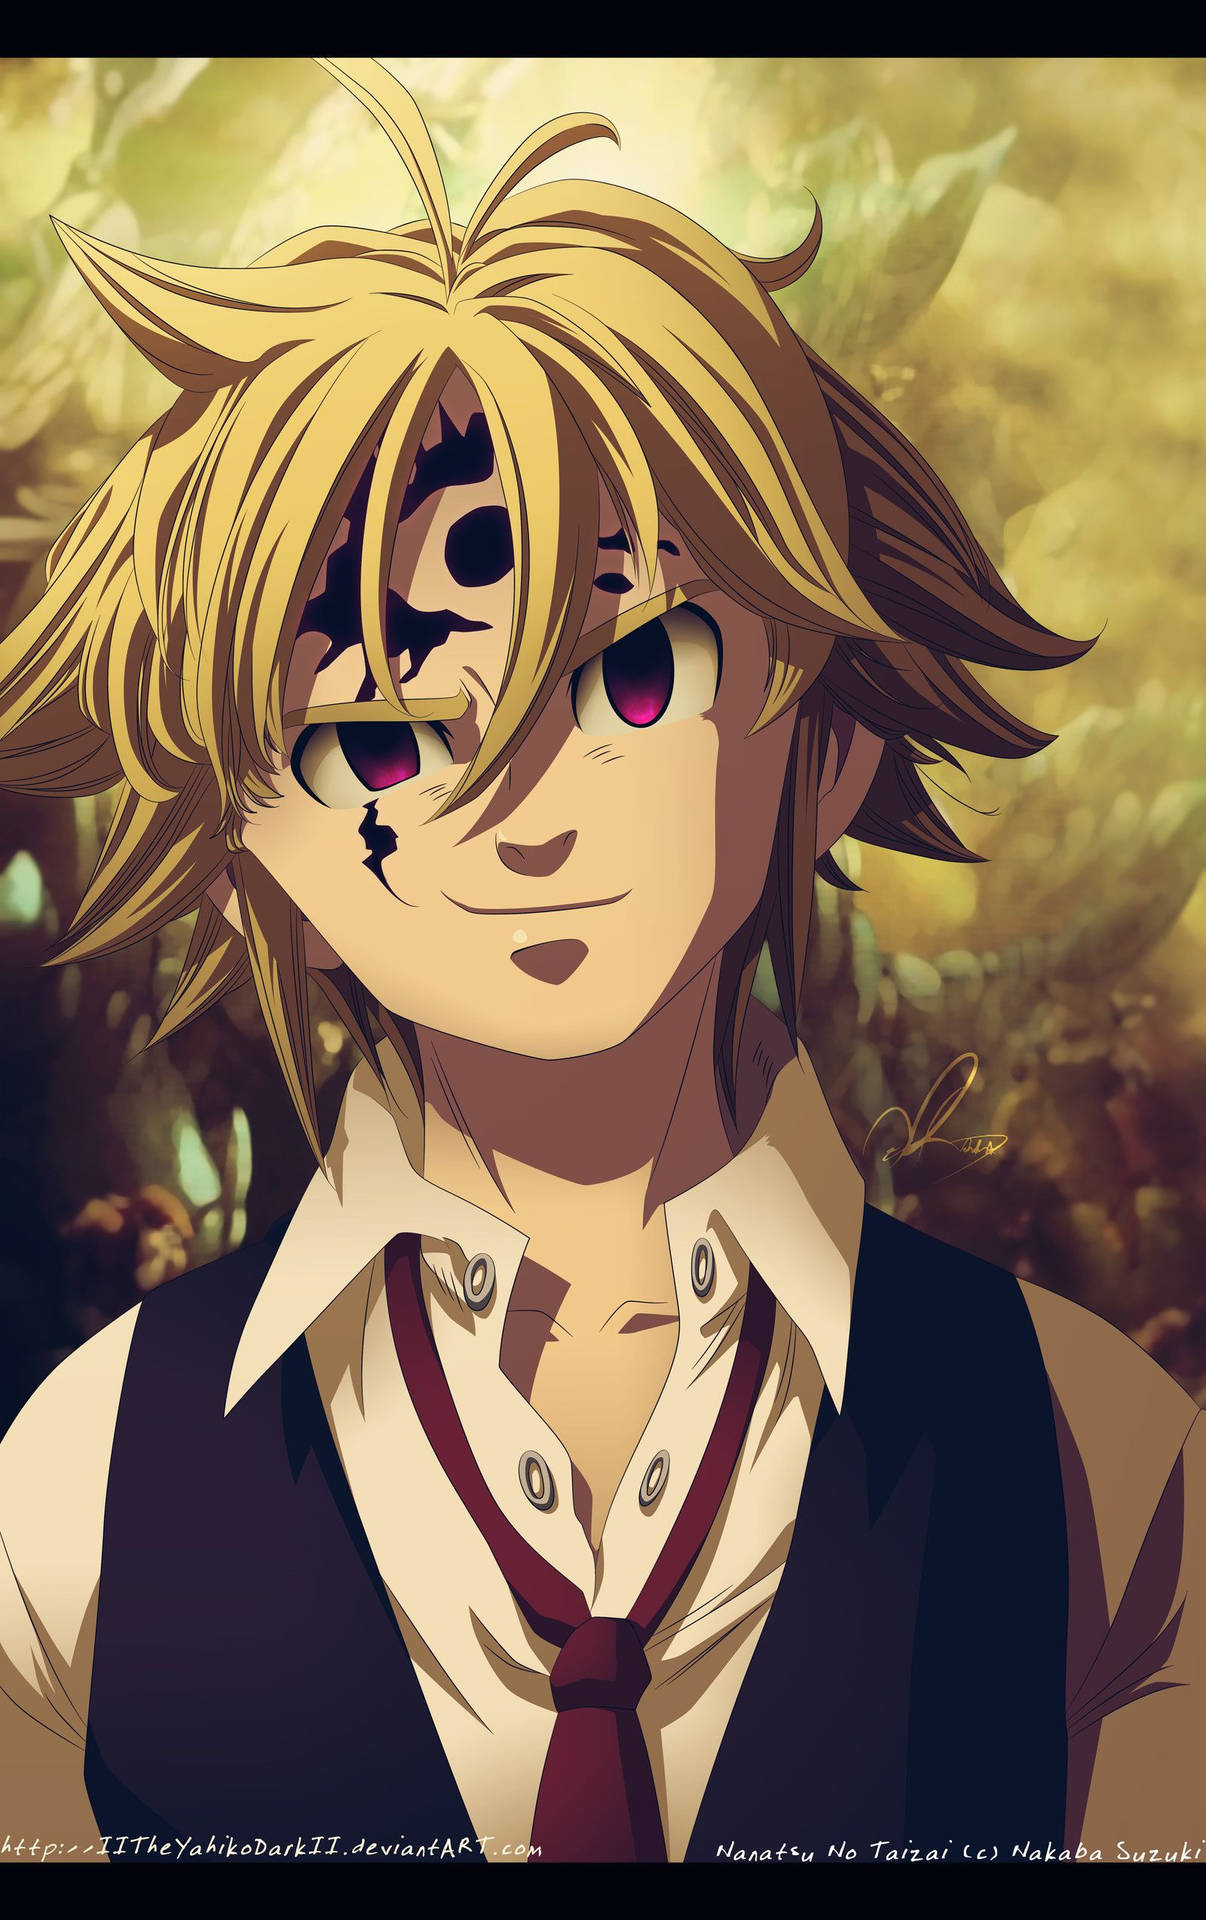 From the anime “The Seven Deadly Sins”, Meliodas is ready for battle with his classic style. Wallpaper